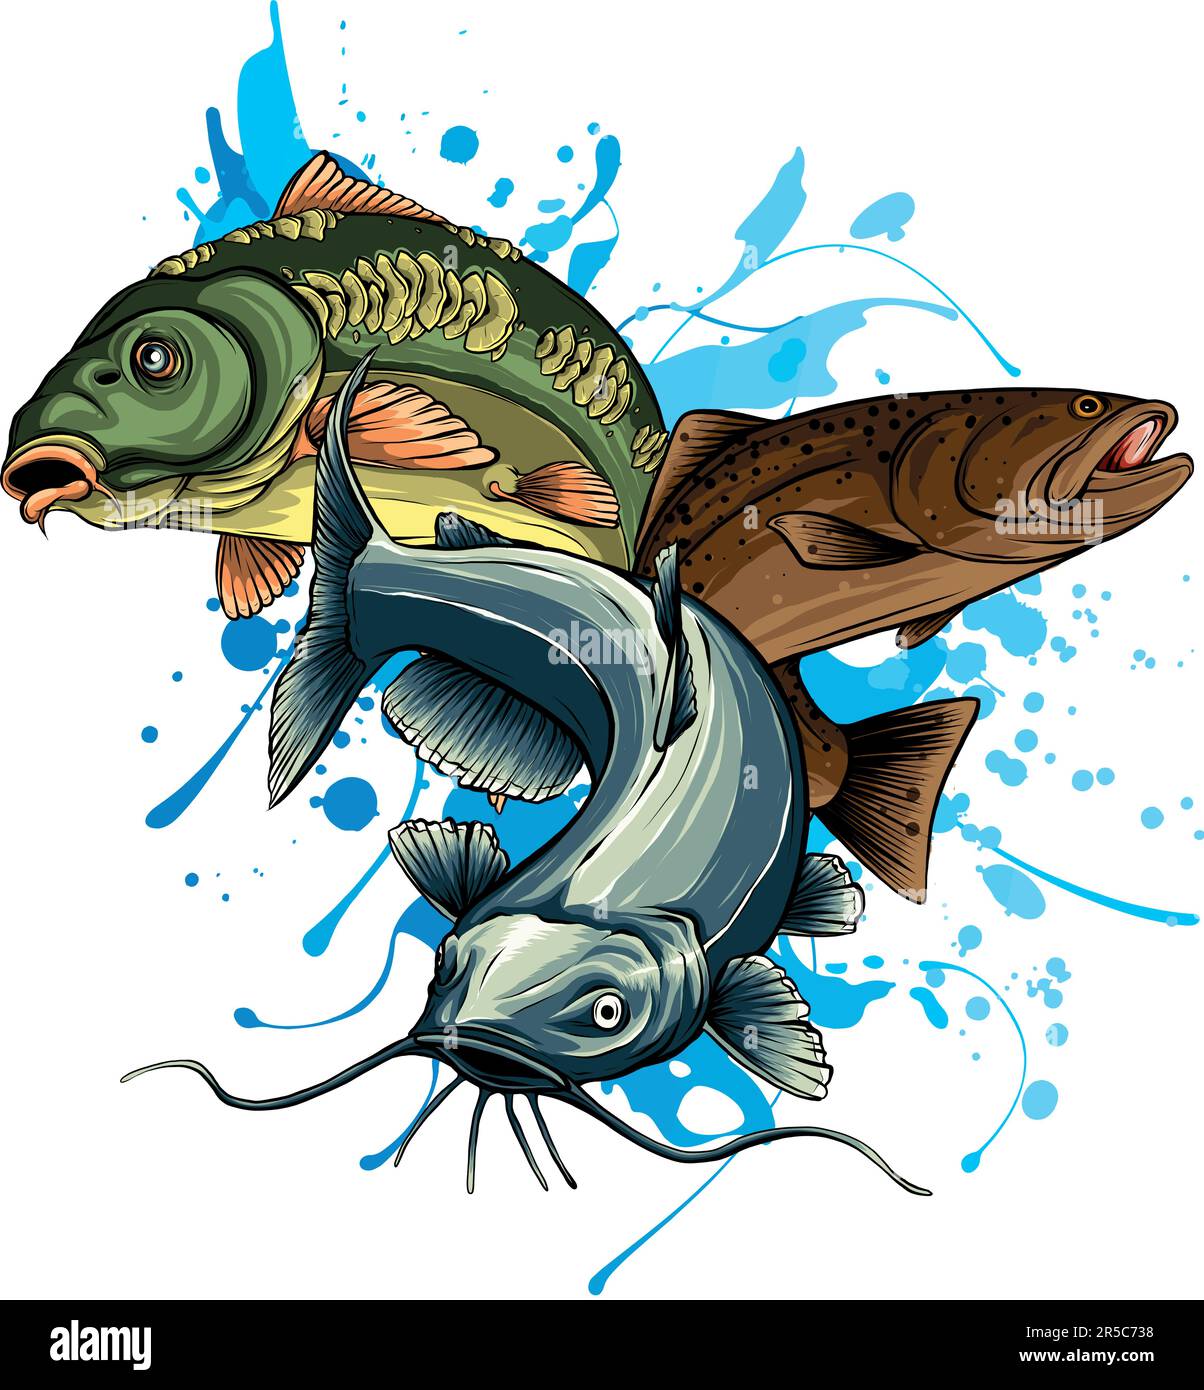 vector illustration of Various freshwater fishes design Stock Vector ...